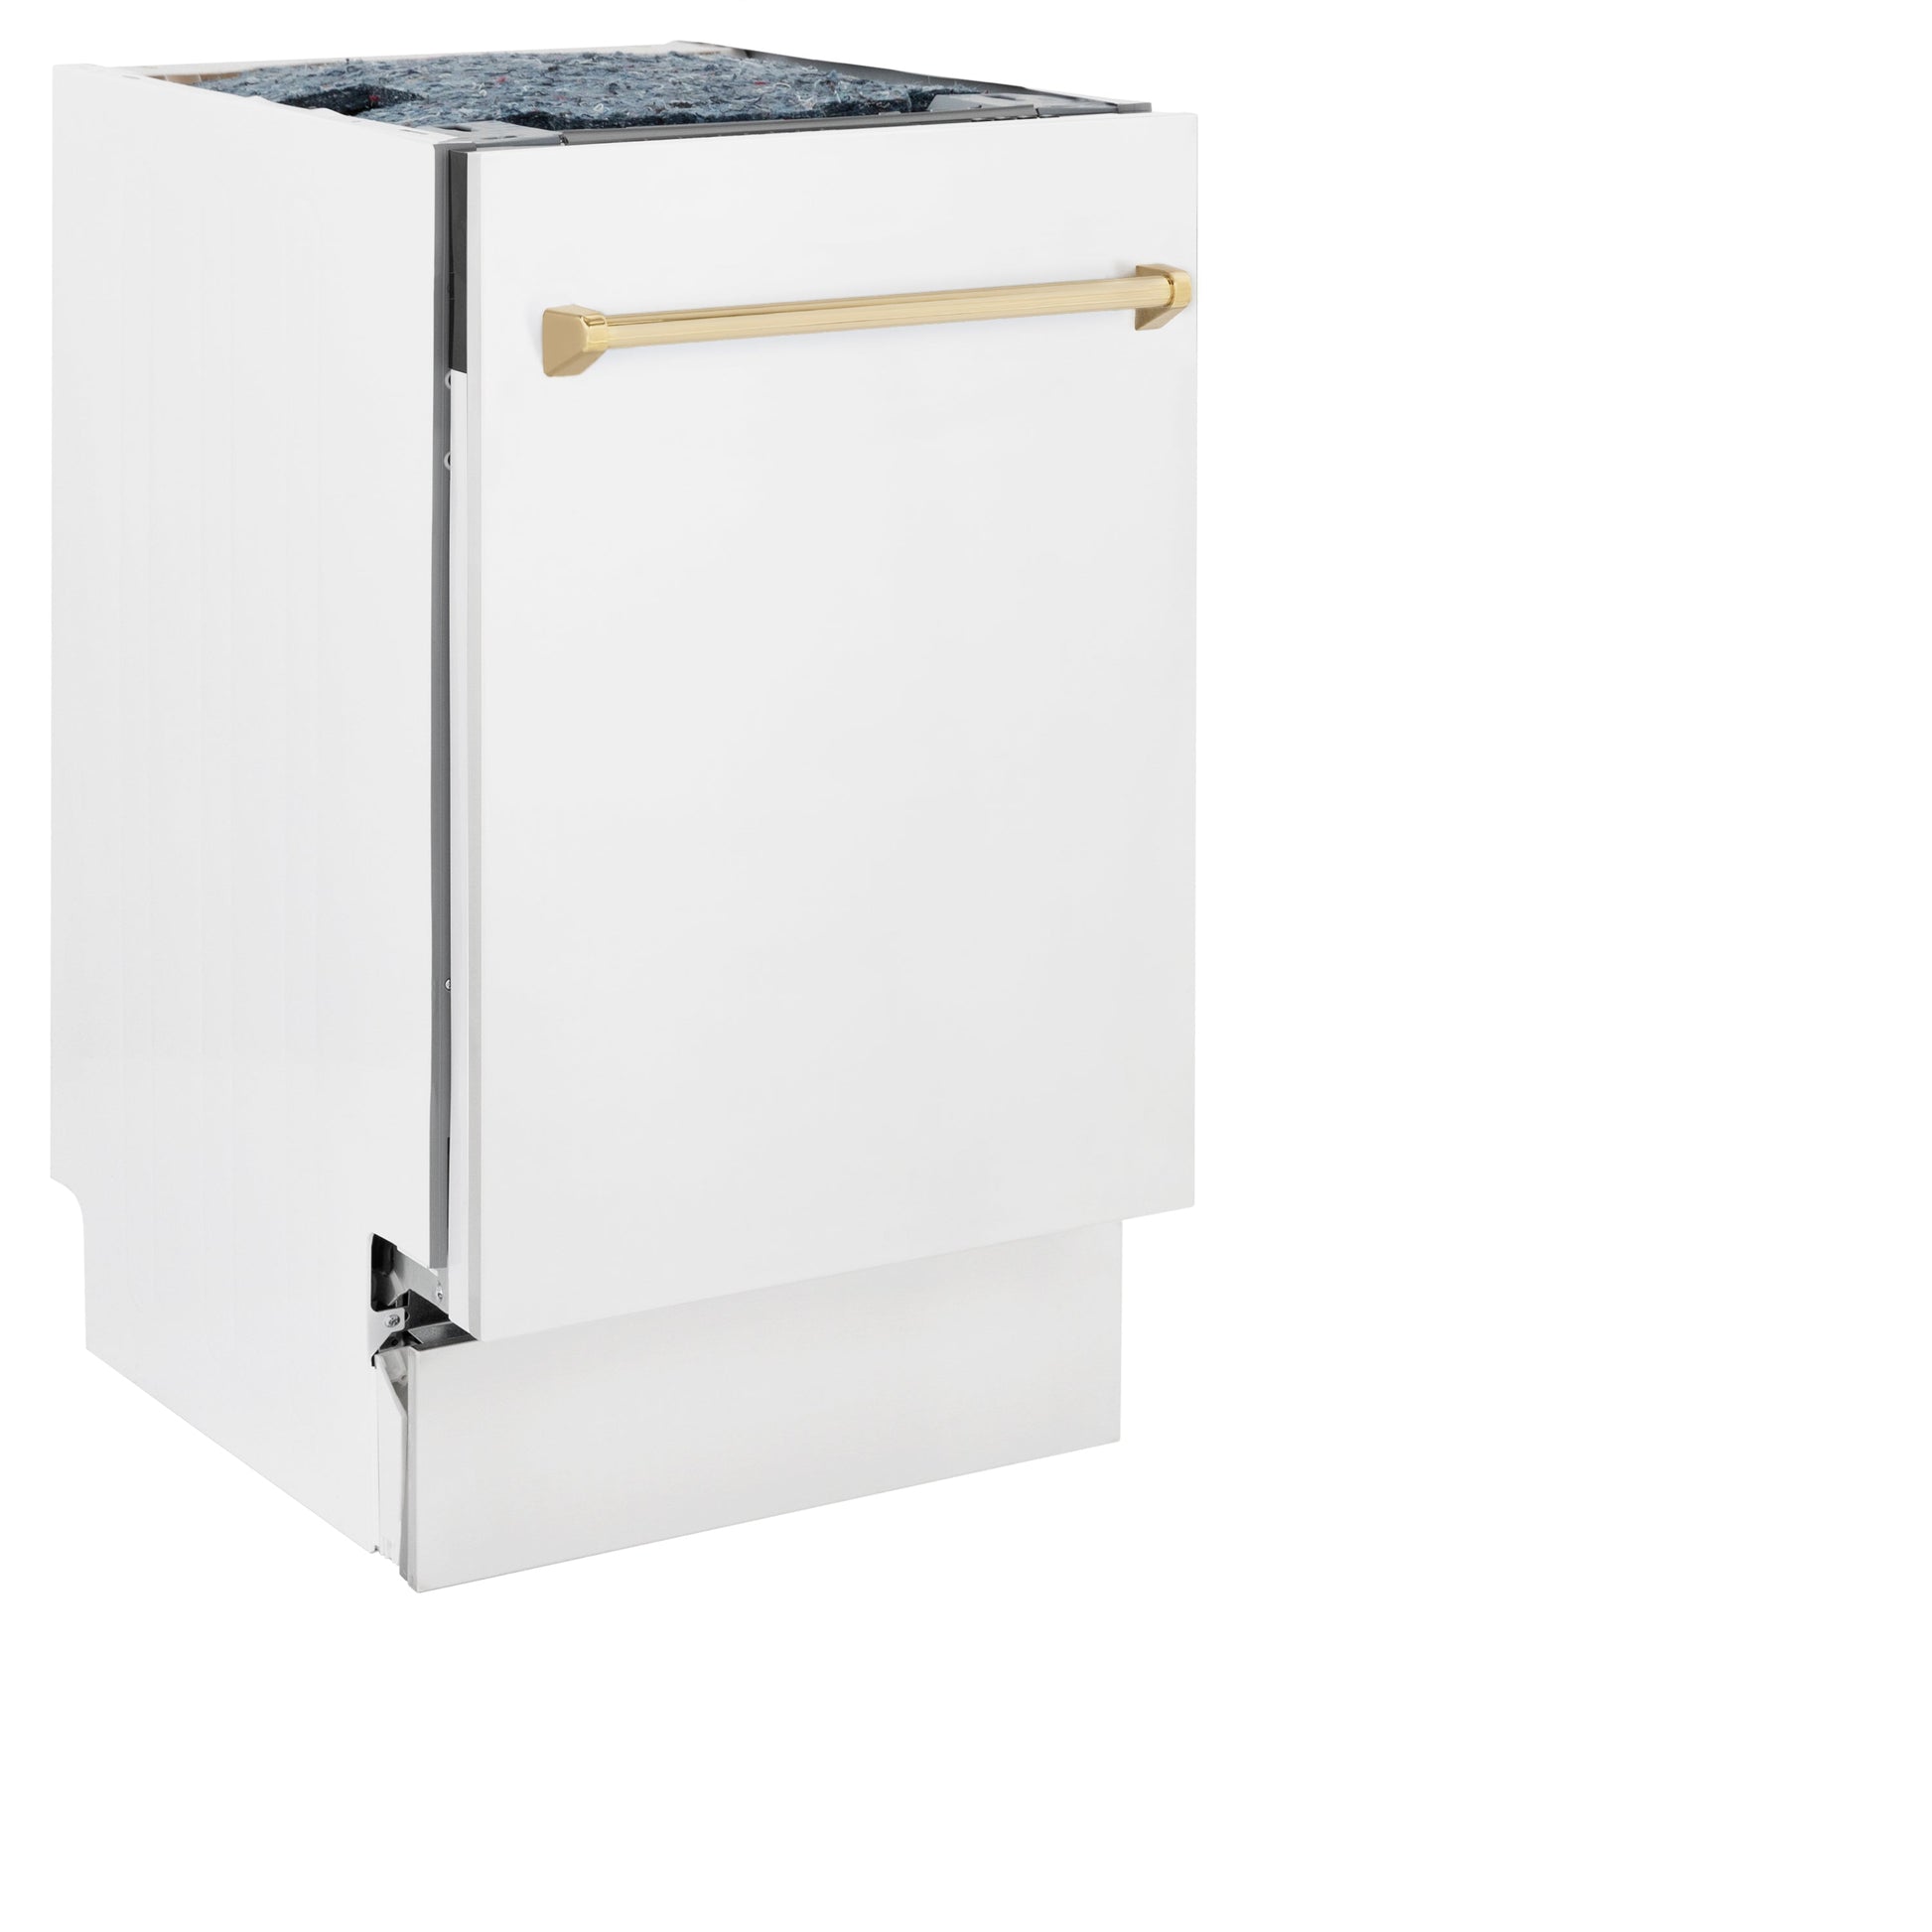 ZLINE Autograph Edition 18 in. Compact 3rd Rack Top Control Dishwasher in White Matte with Polished Gold Accent Handle, 51dBa (DWVZ-WM-18-G) front, closed.